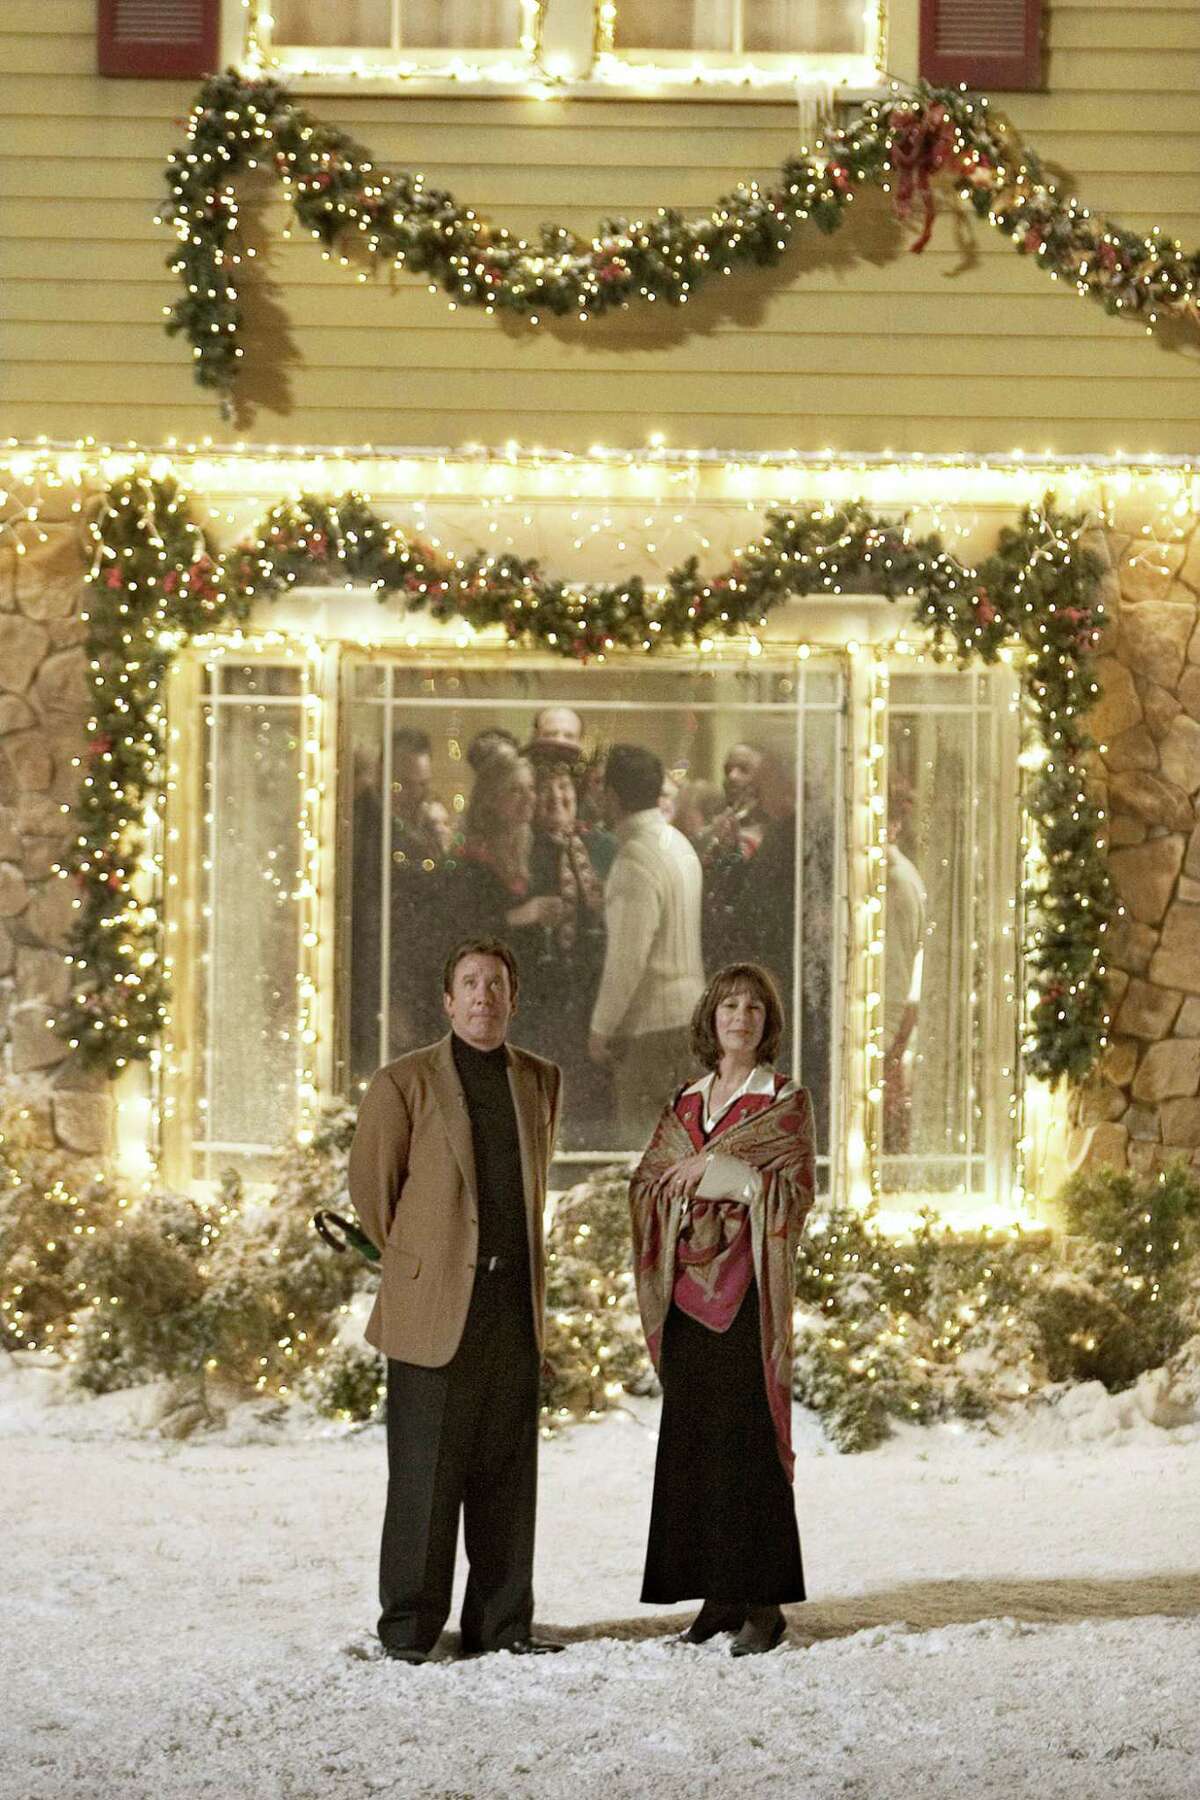 © 2004 Columbia Pictures Industries, Inc. All Rights Reserved. Credit: Zade Rosenthal. Tim Allen(l) and Jamie Lee Curtis star in Revolution Studios?’ comedy Christmas with the Kranks, a Columbia Pictures release. Photo Credit: Zade Rosenthal